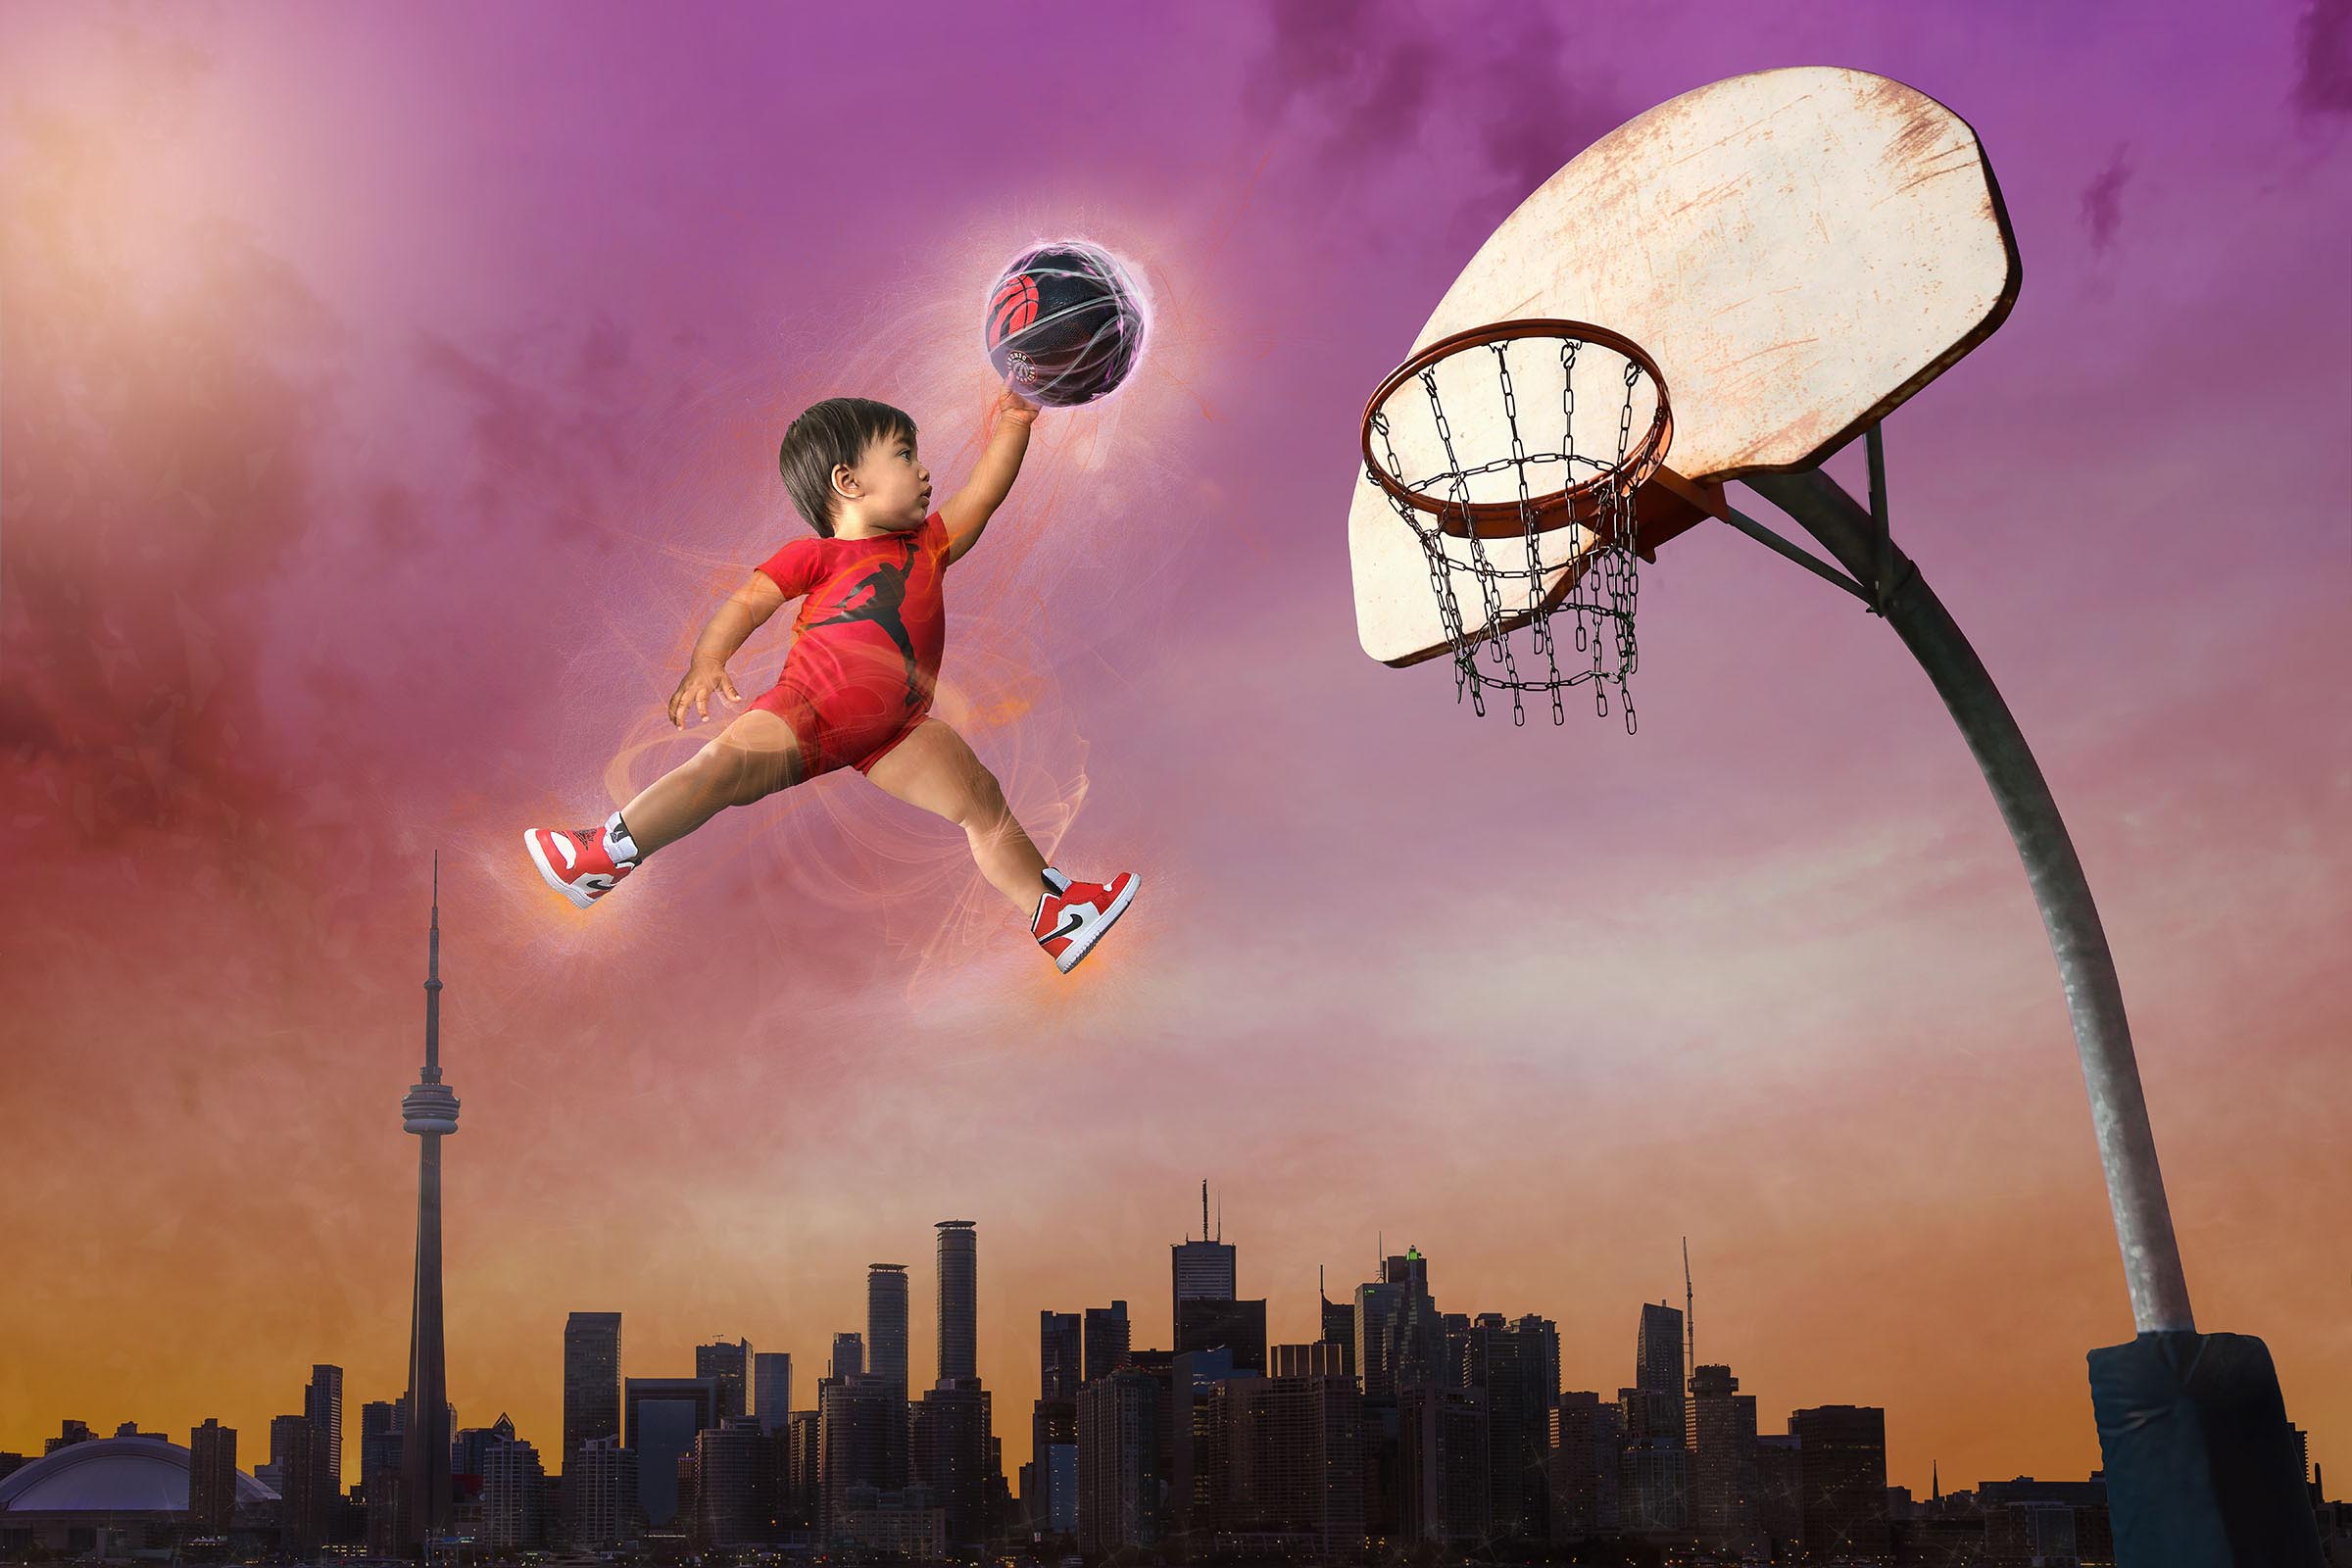 Composite of baby boy flying in the air dunking a Toronto Raptors basketball into a hoop with city of Toronto background by Vaudreuil-Soulanges and West Island of Montreal photographer Tobi Malette